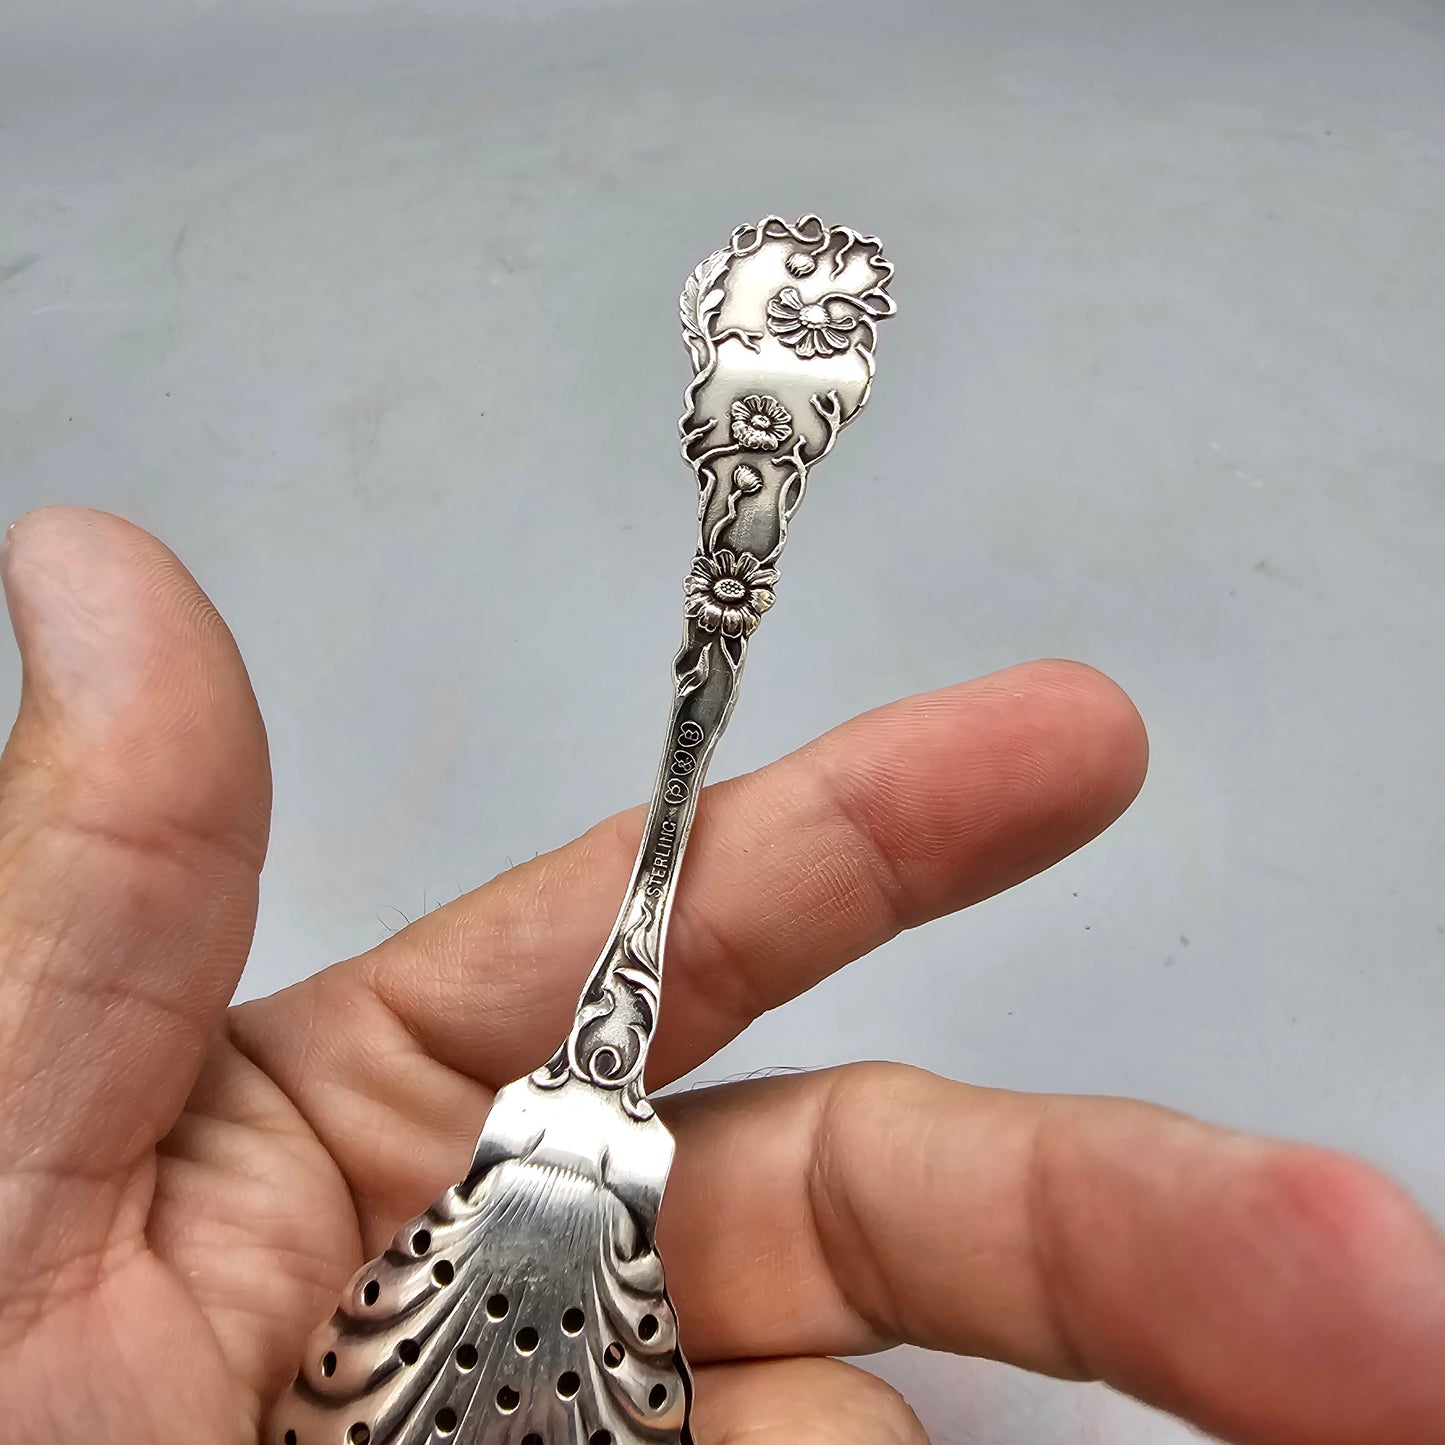 Daisy By Paye And Baker Sterling Silver Tea Infuser Spoon